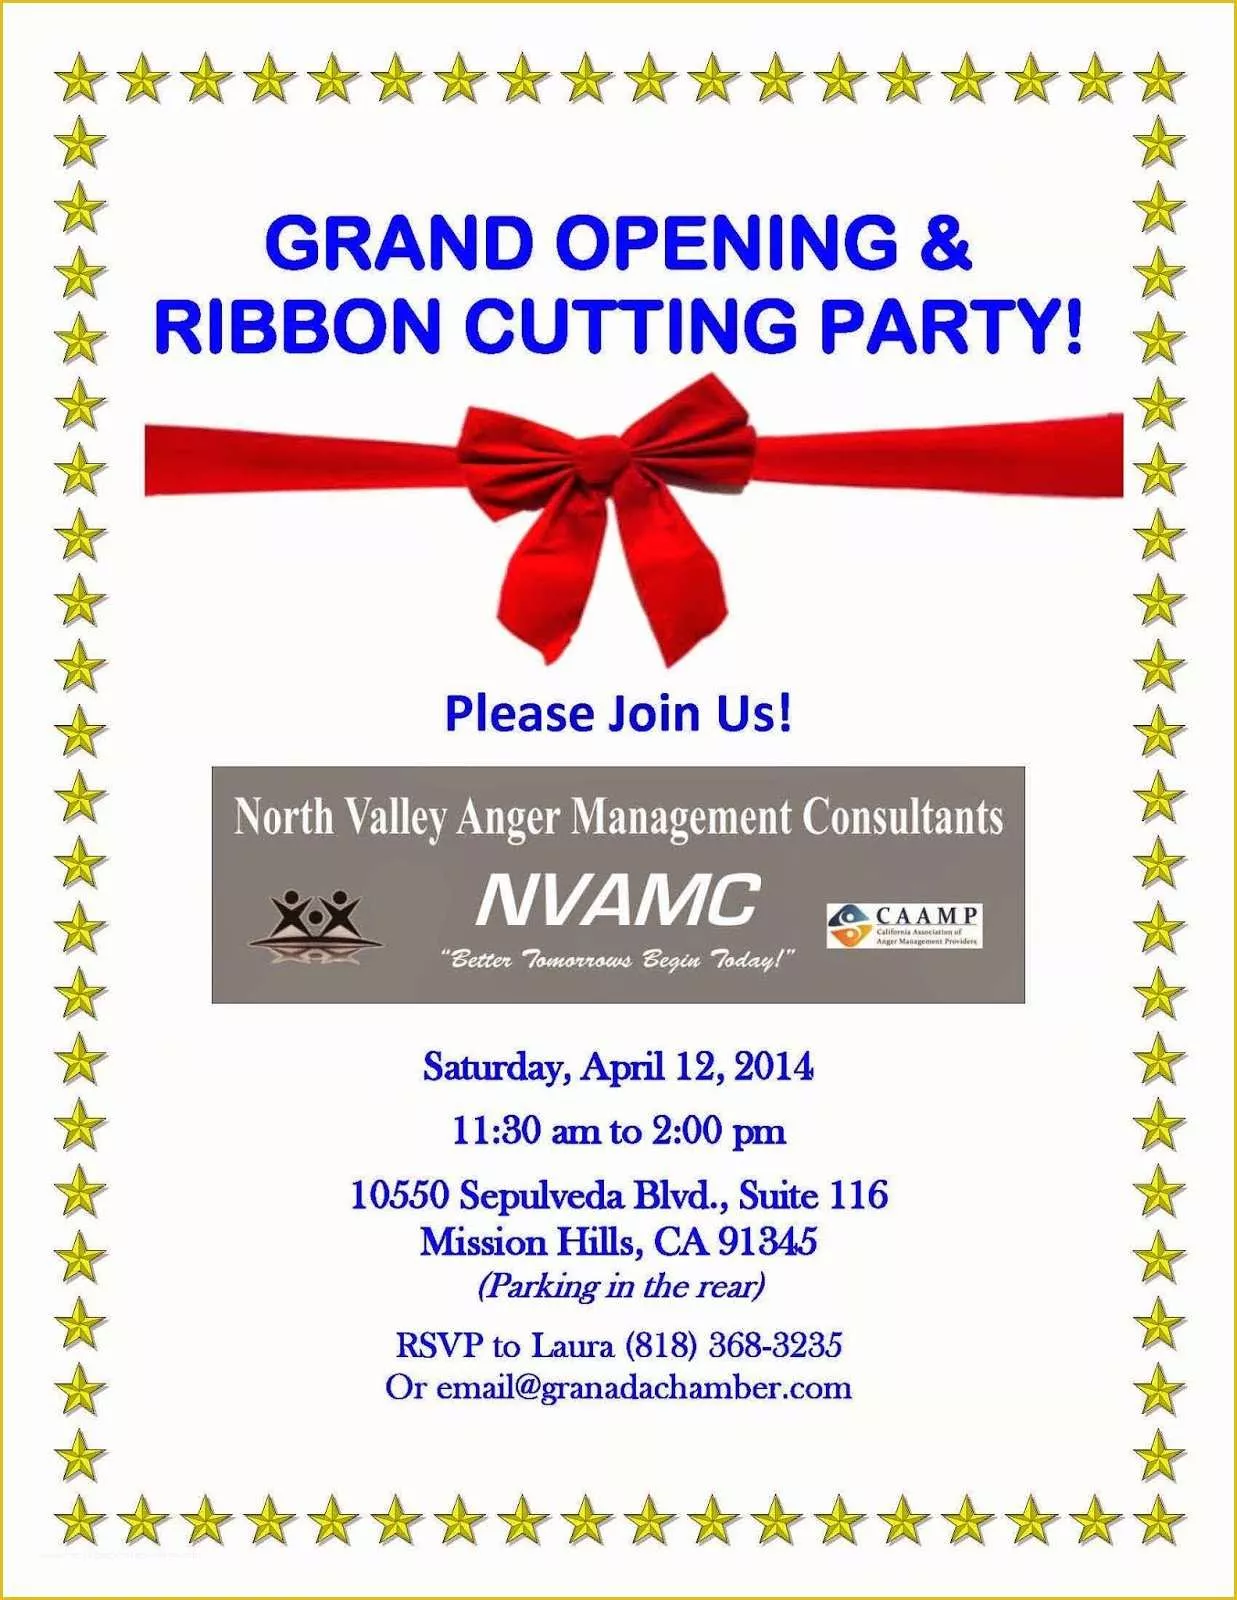 Ribbon Cutting Ceremony Invitation Template Free Of Anger Management for Modern Life Grand Opening & Ribbon